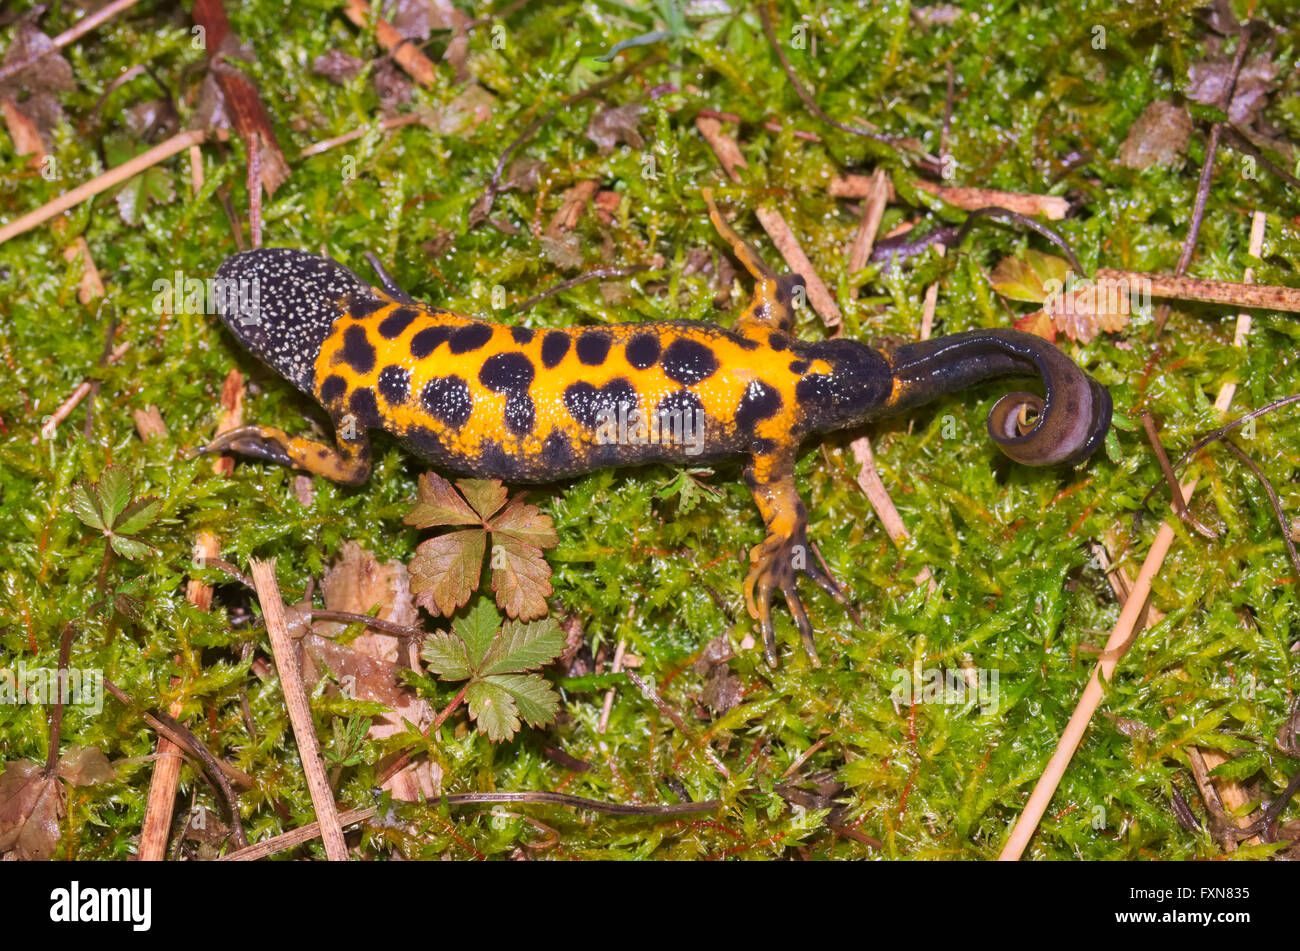 Italian crested newt (Triturus carnifex) view of the orange belly Stock Photo